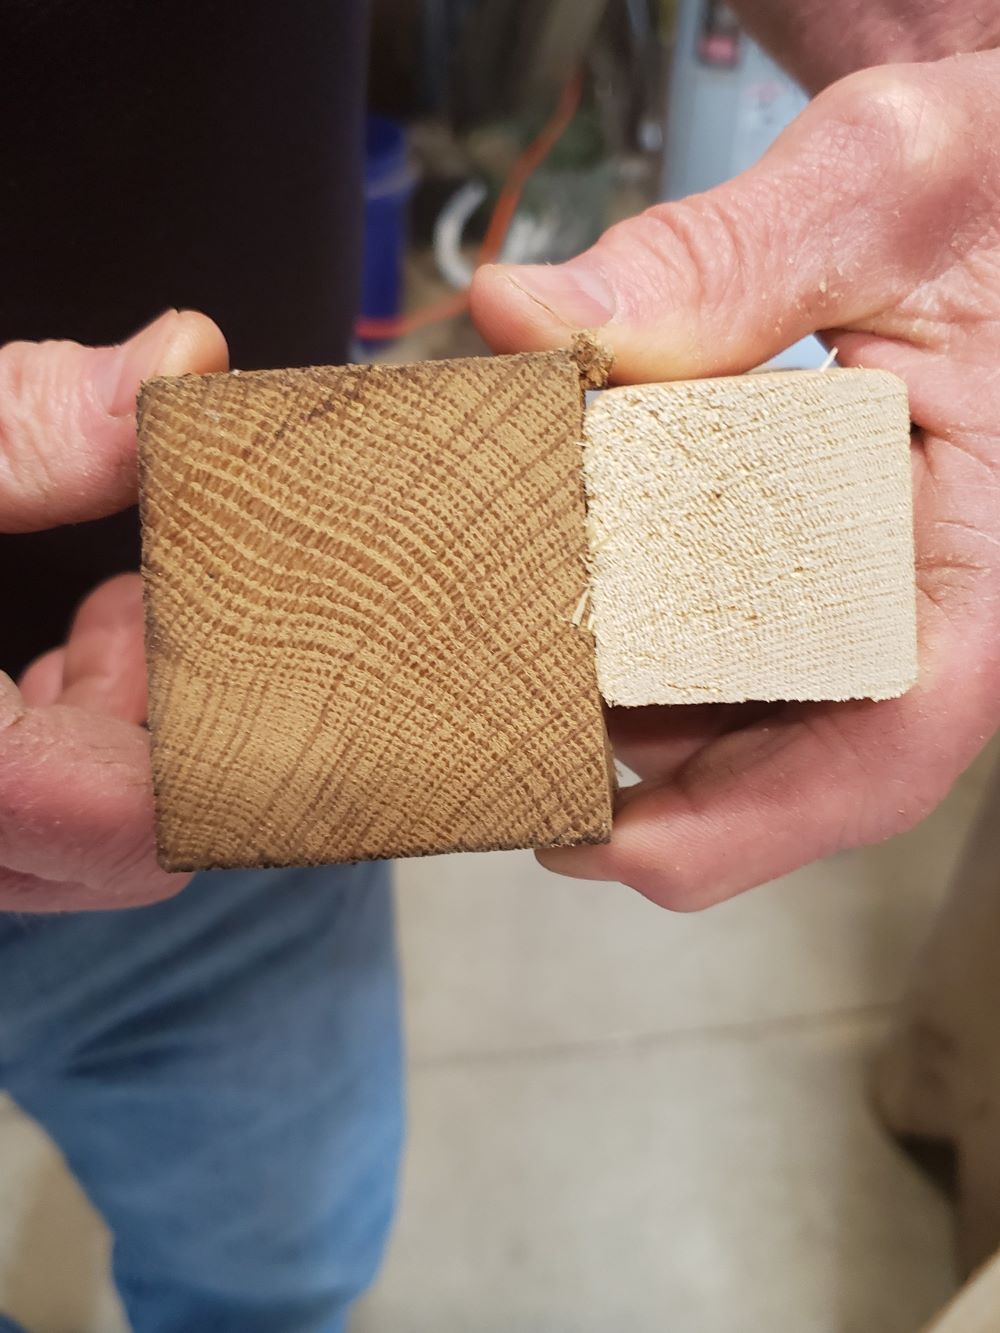 A side-by-side comparison of old growth and new growth wood